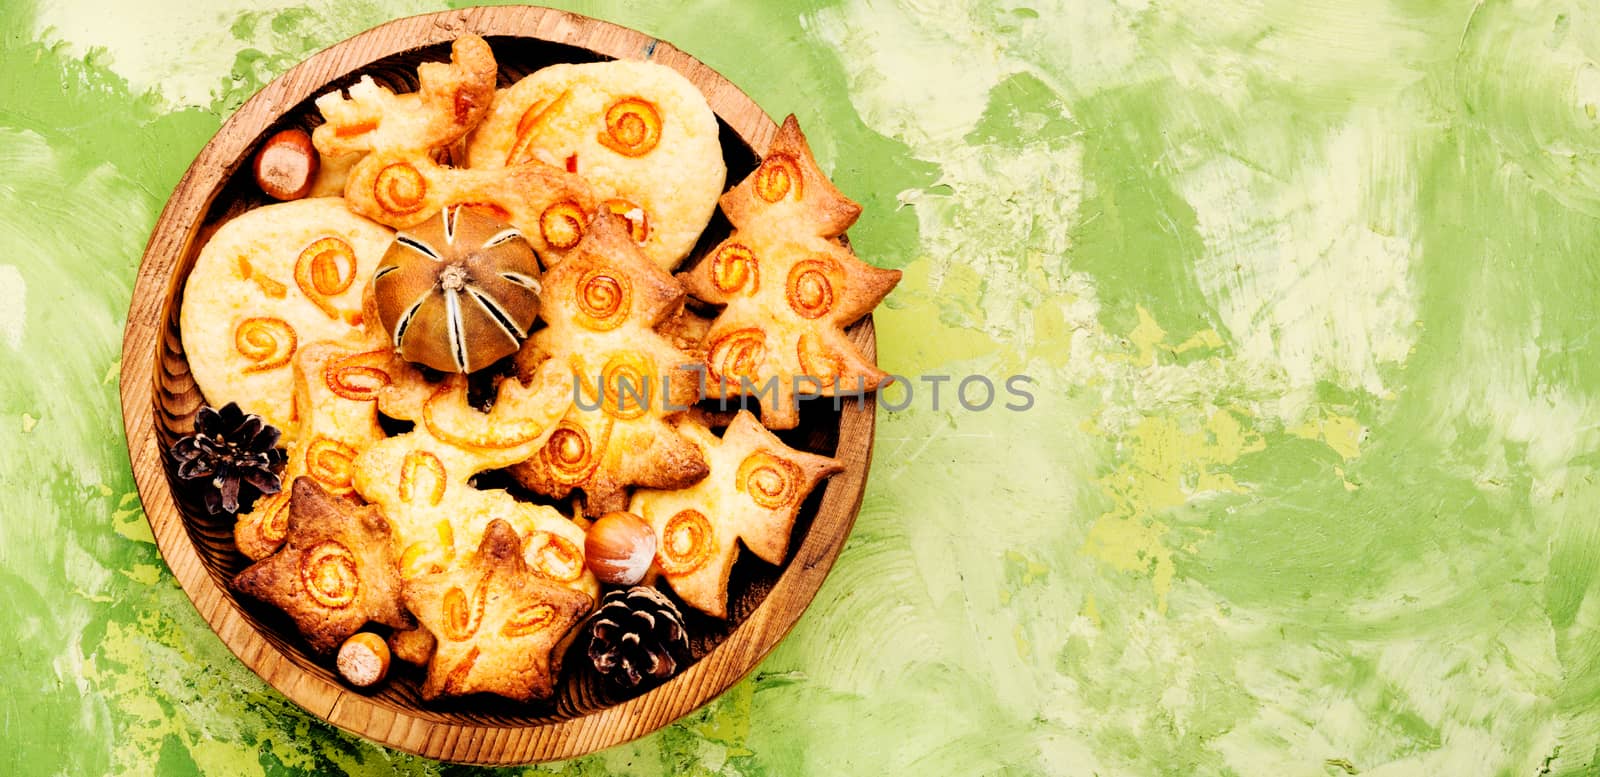 Assortment of Christmas cookies decorated with candied orange.Pastry